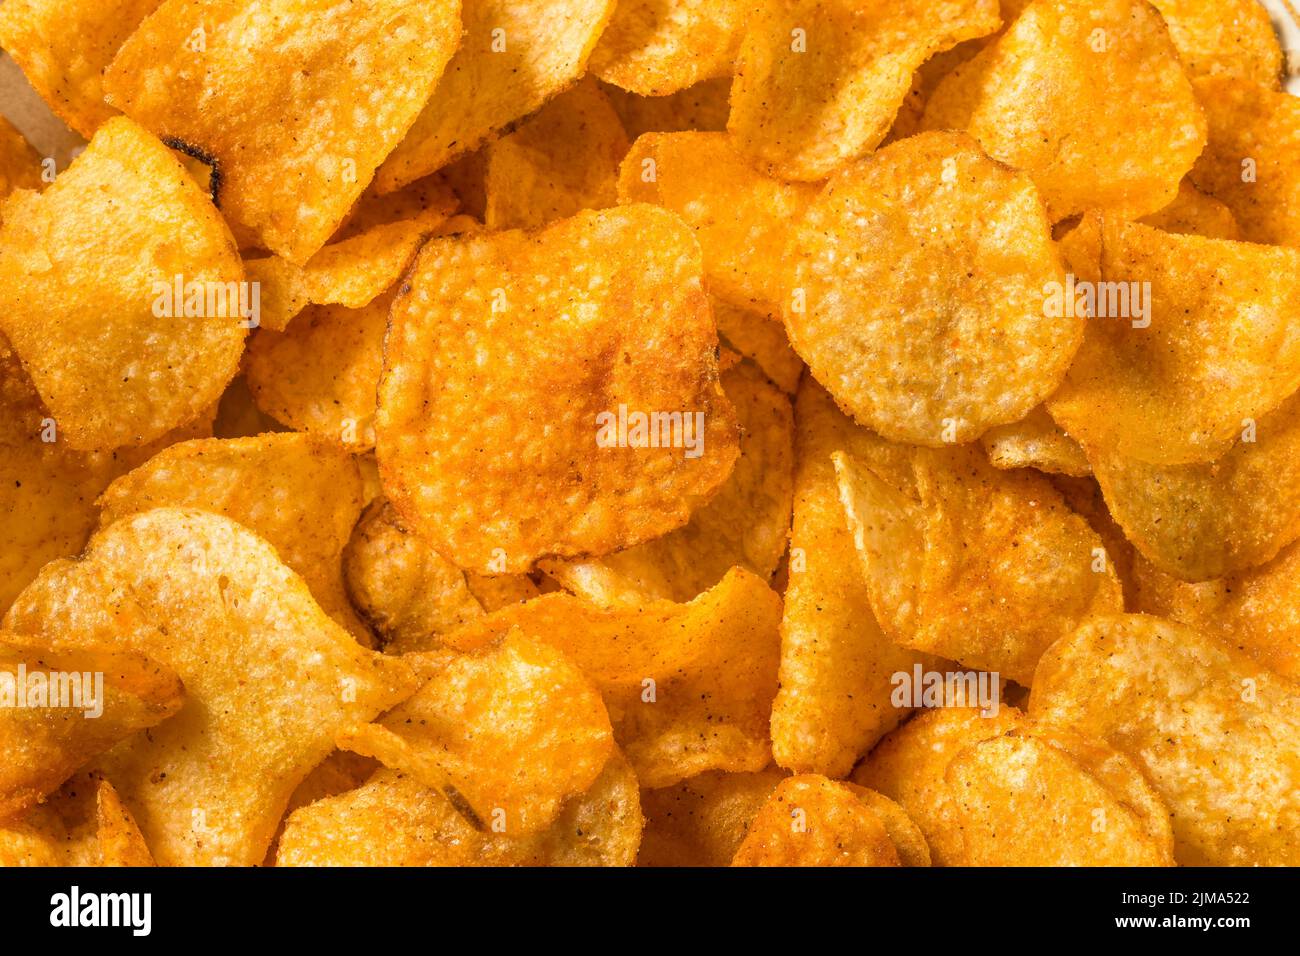 Crunchy Barbecue BBQ Potato Chips Ready to Eat Stock Photo